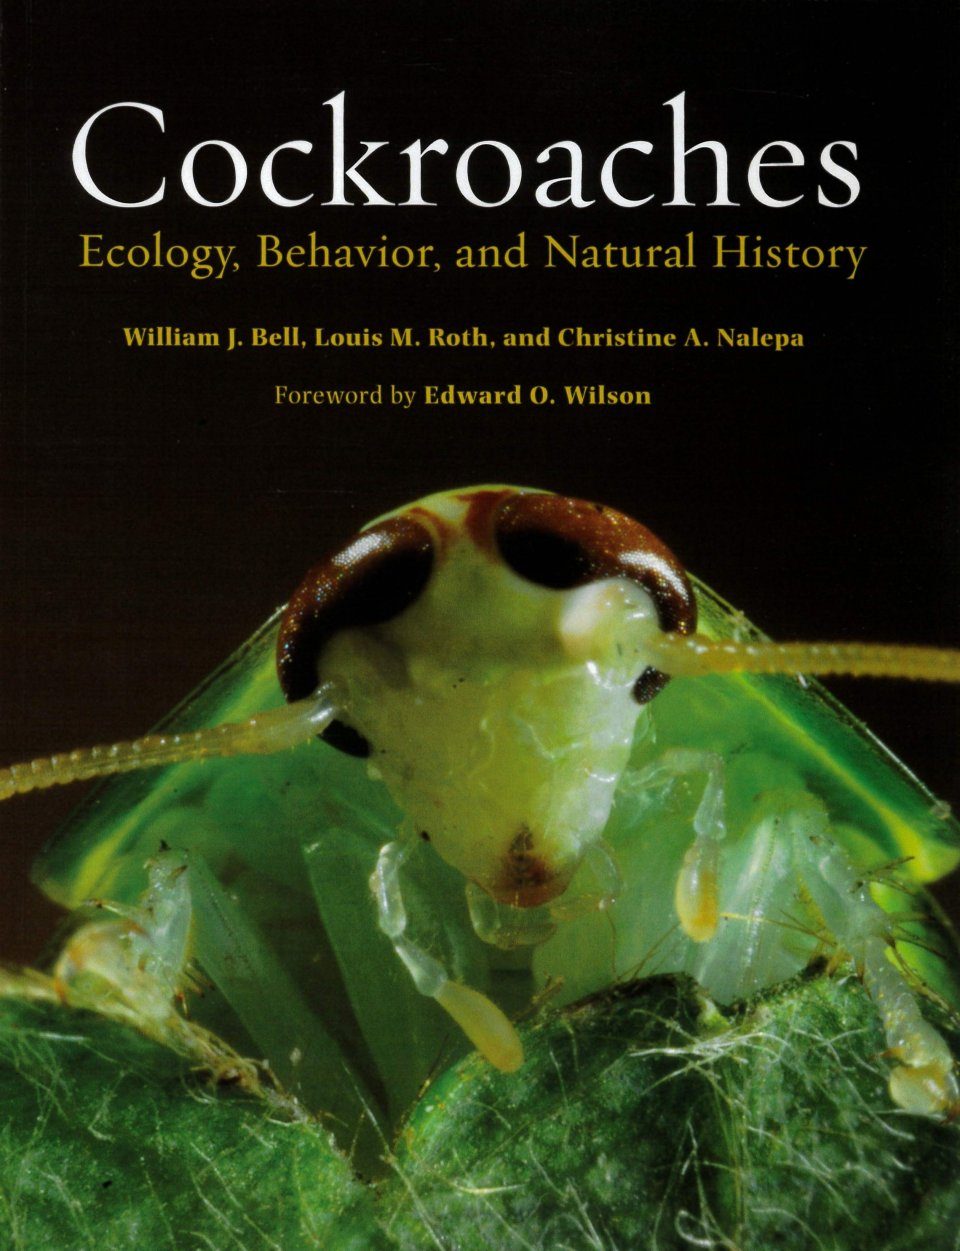 (pdf) Cockroaches : Ecology, Behavior, And Natural History